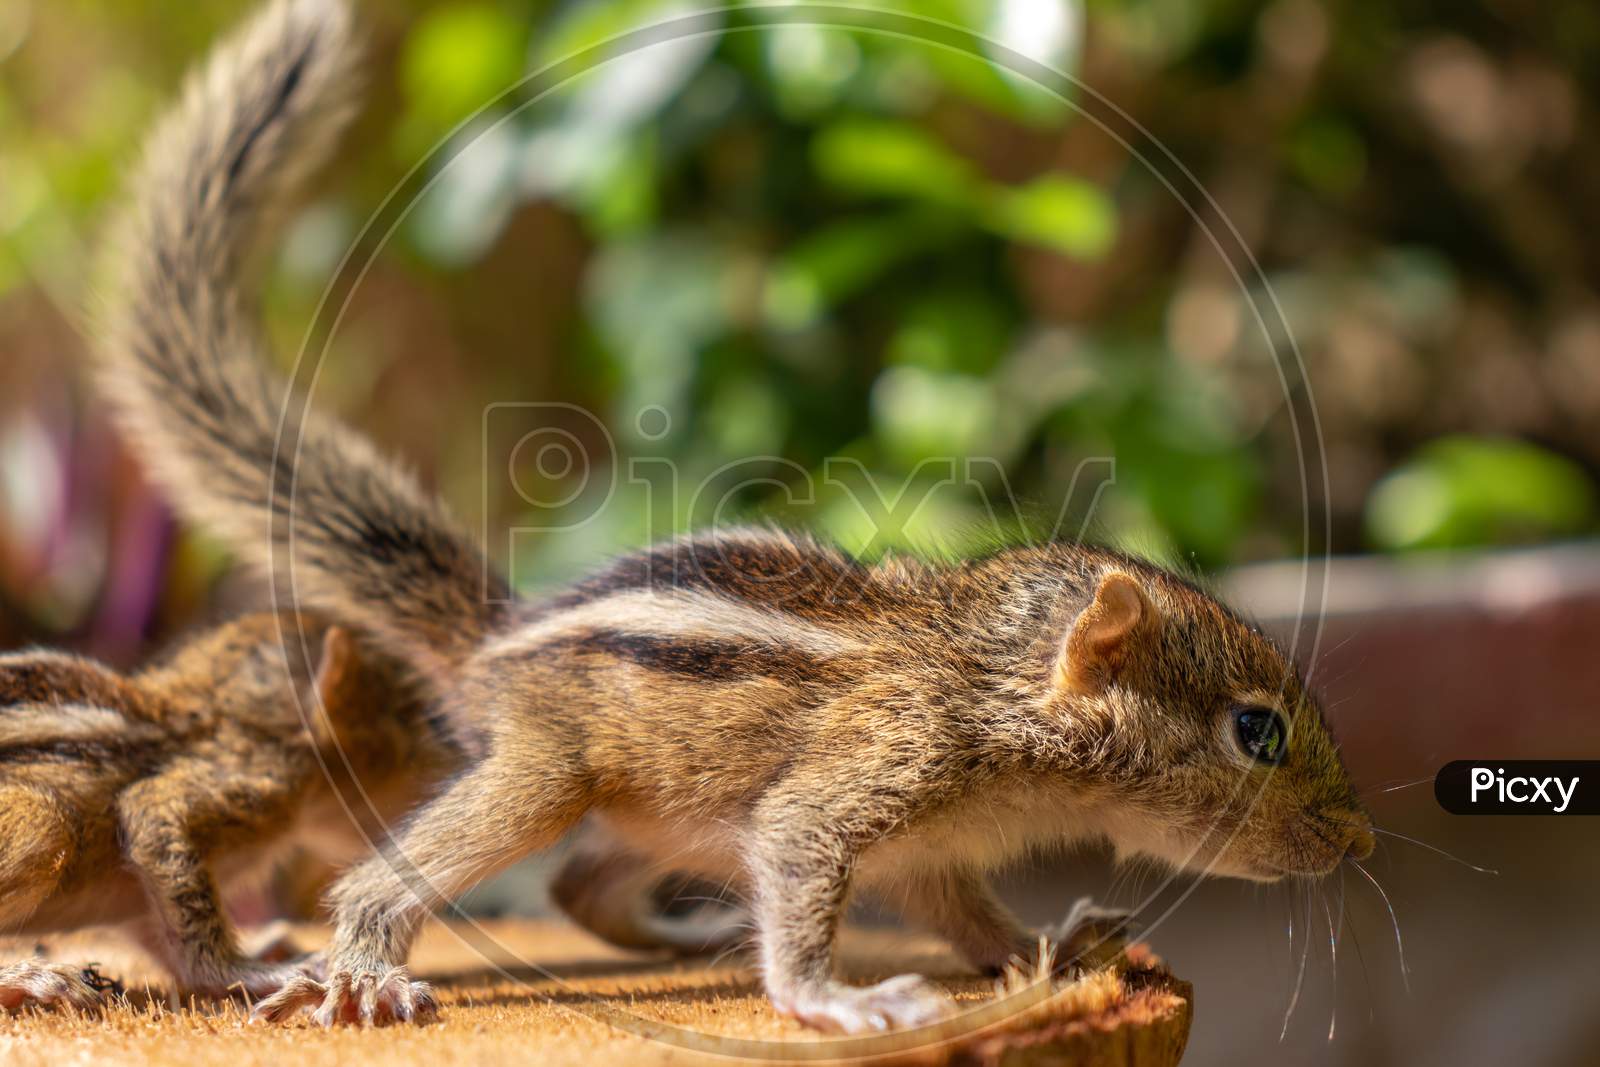 Hungry Little Baby Squirrels Looking Out For Their Mother